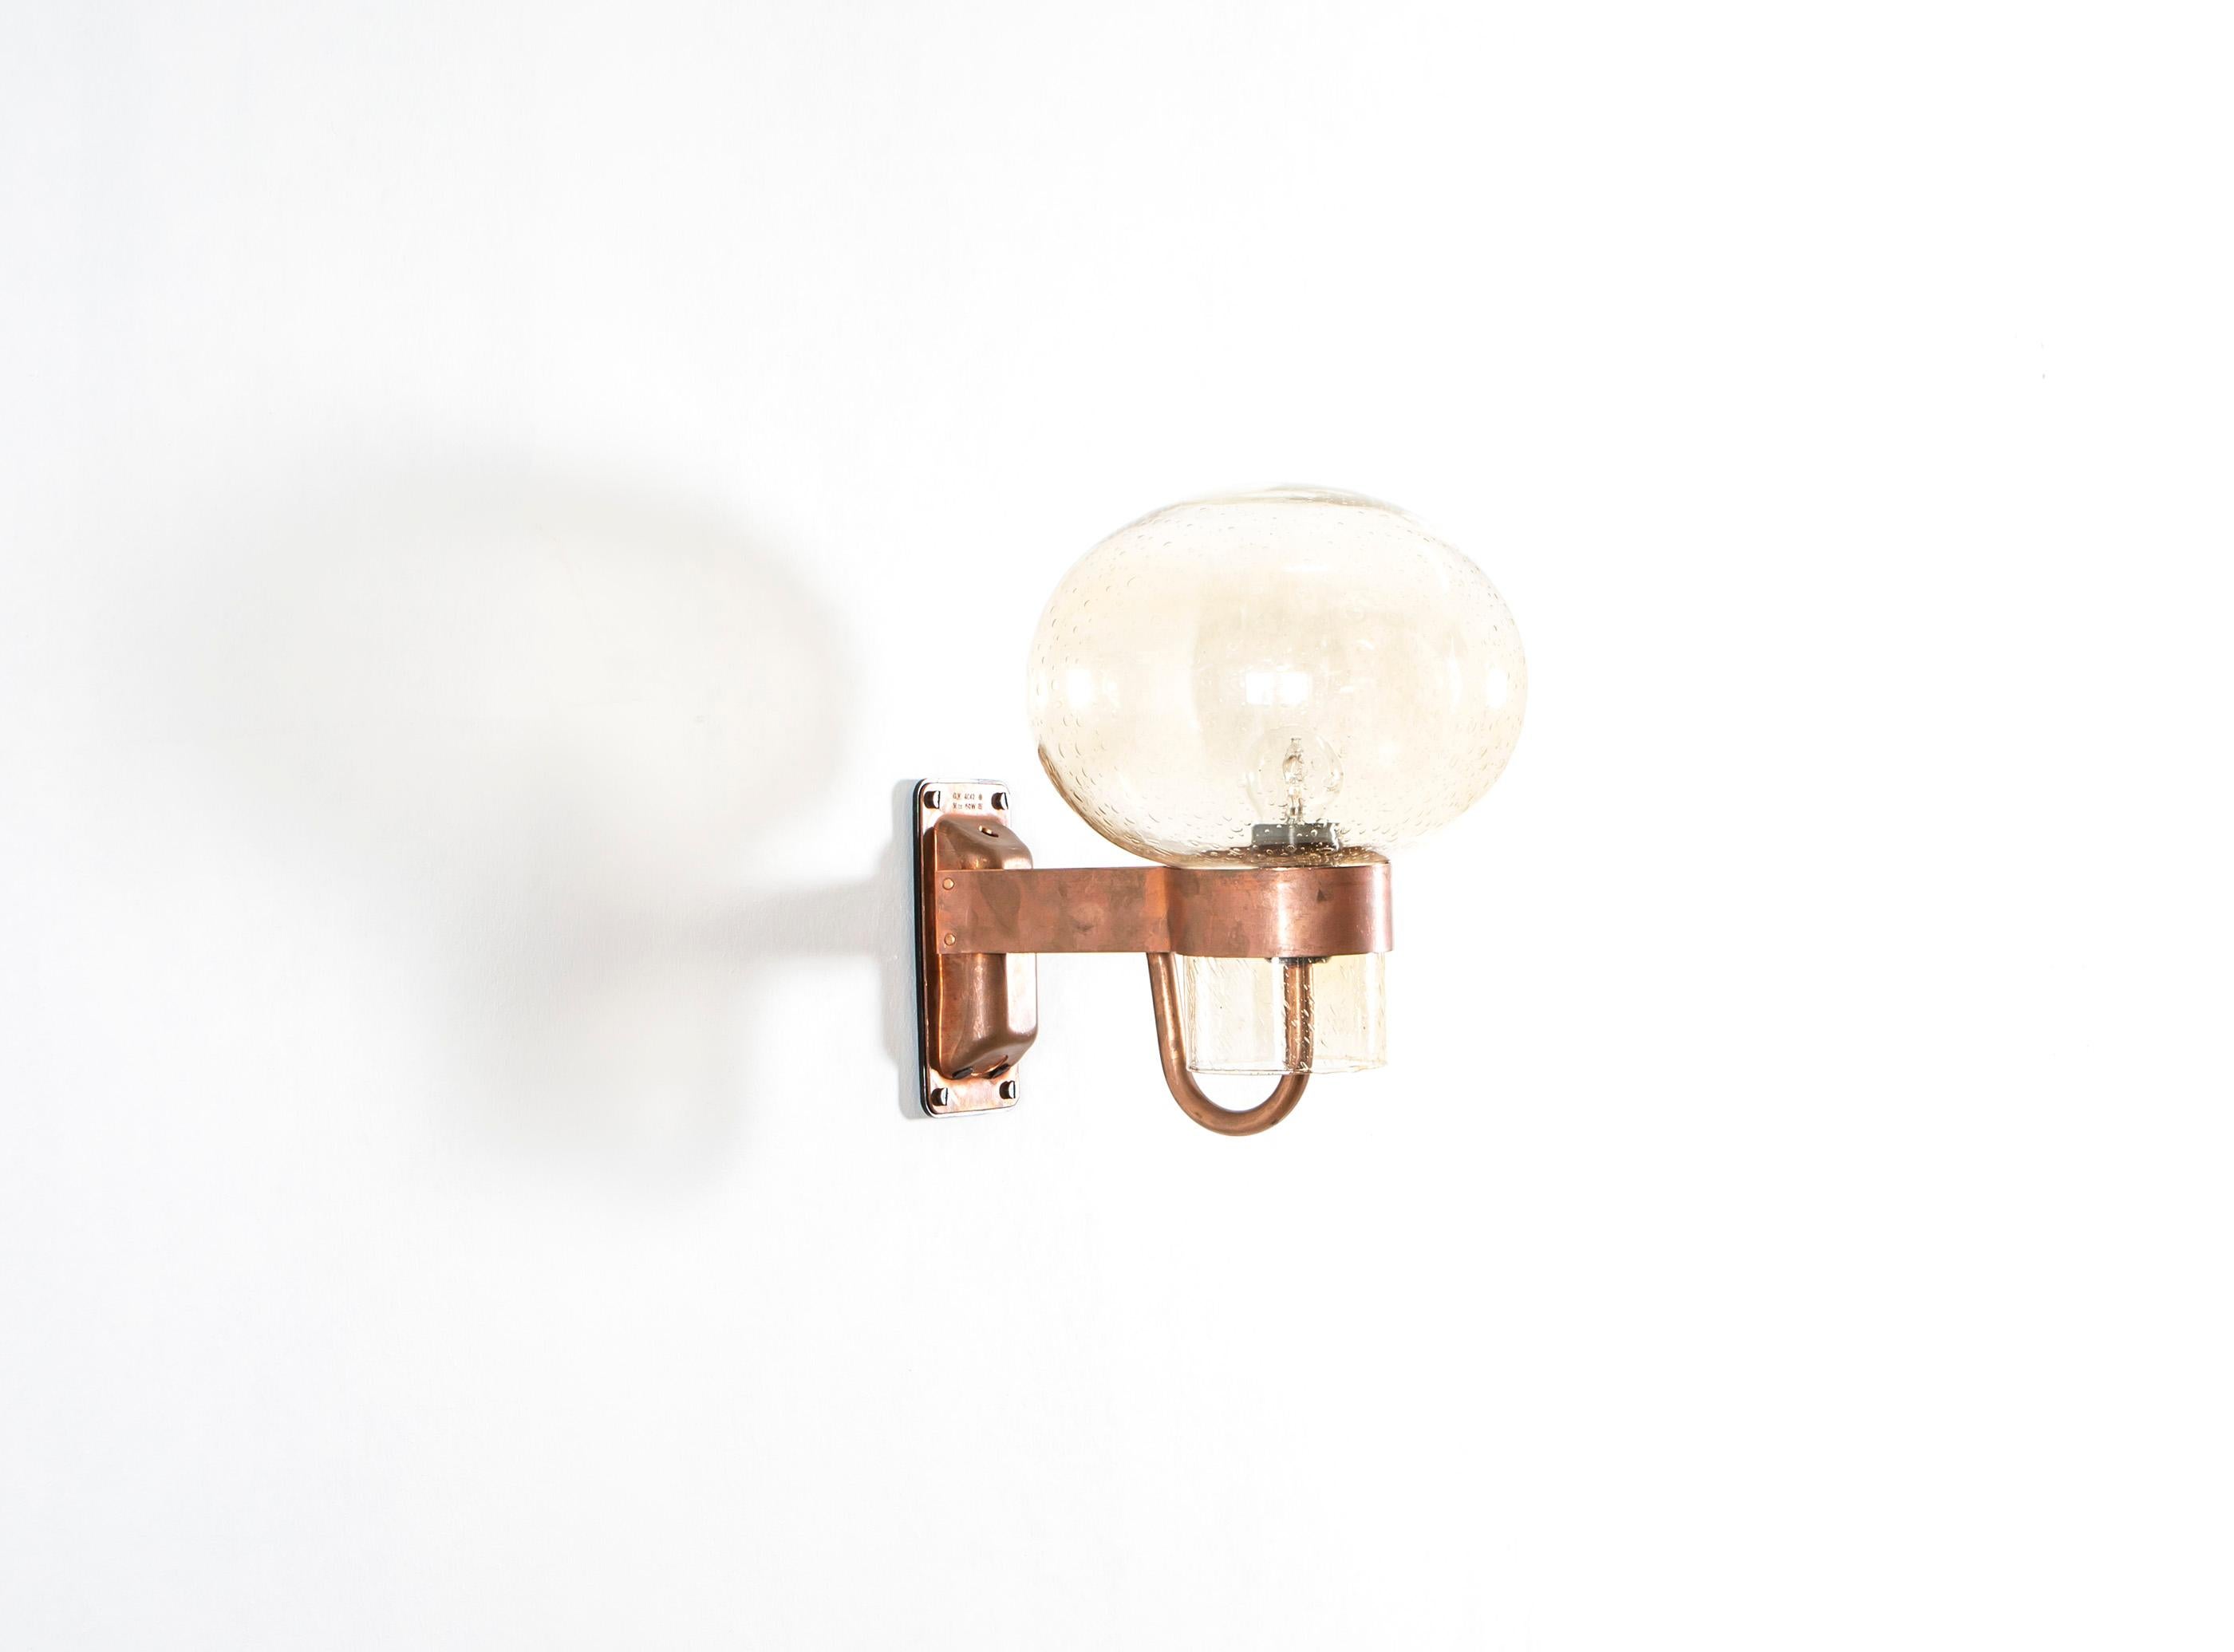 Wonderful and decorative wall light in copper and glass. Designed and made in Norway from circa 1970s second half. The lamp is fully working and in good vintage condition. The lamp is fitted with one E27 bulb holder (works in the US) with a